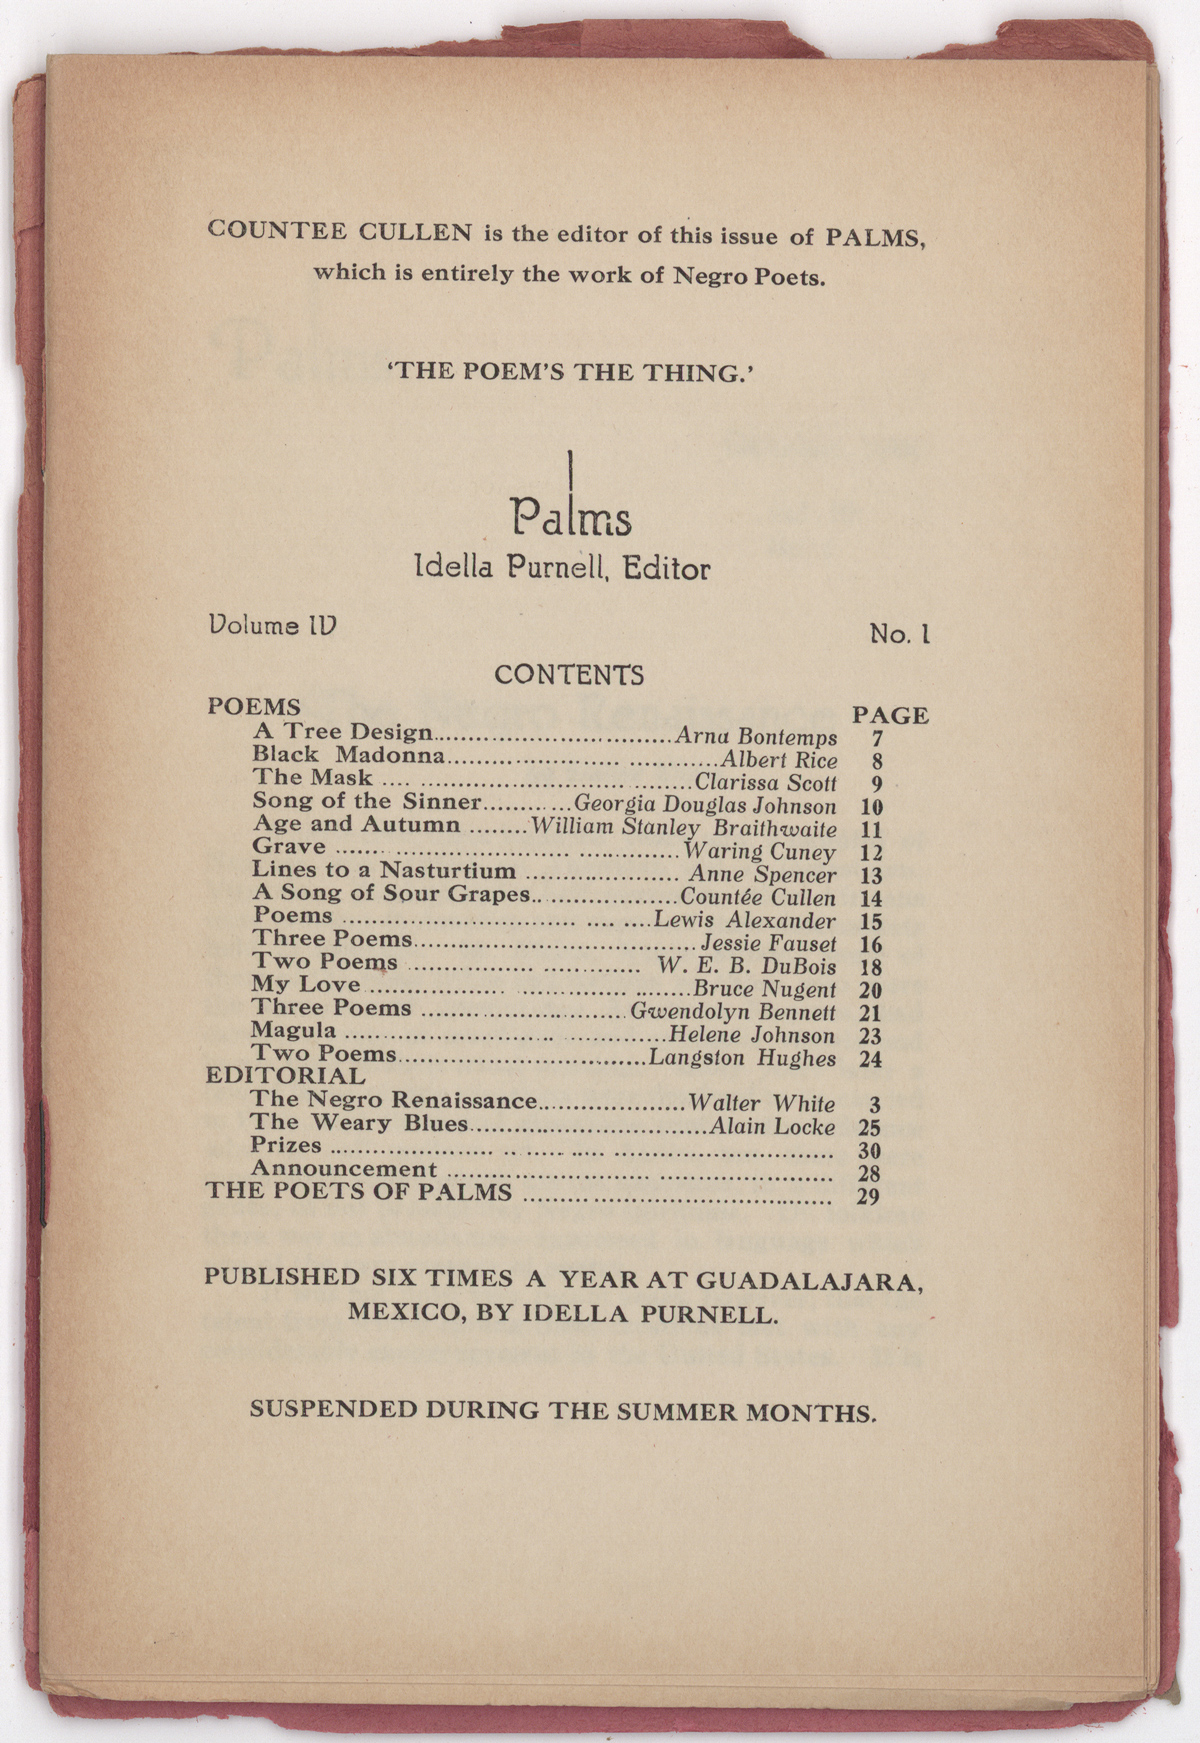 The title page of the special issue of Palms, noting Countée Cullen’s role as editor. 